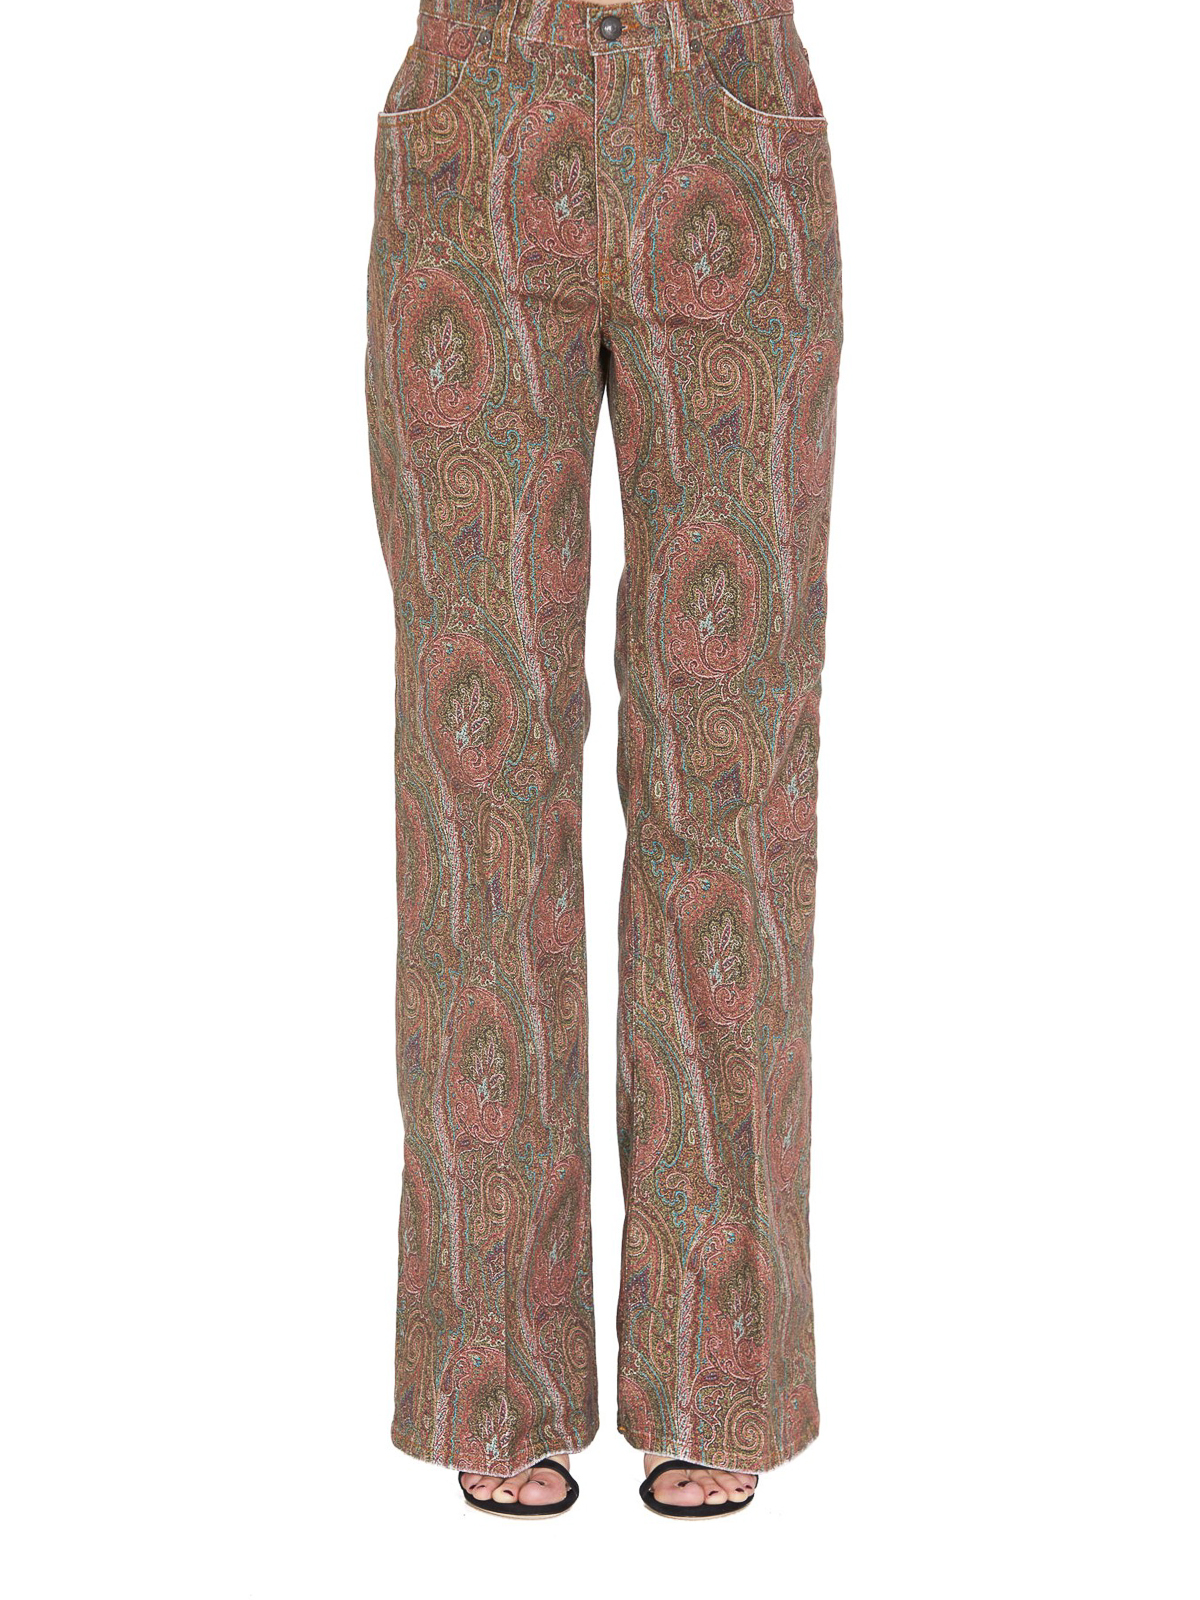 Straight leg jeans Etro - Paisley patterned jeans - 1370598350100